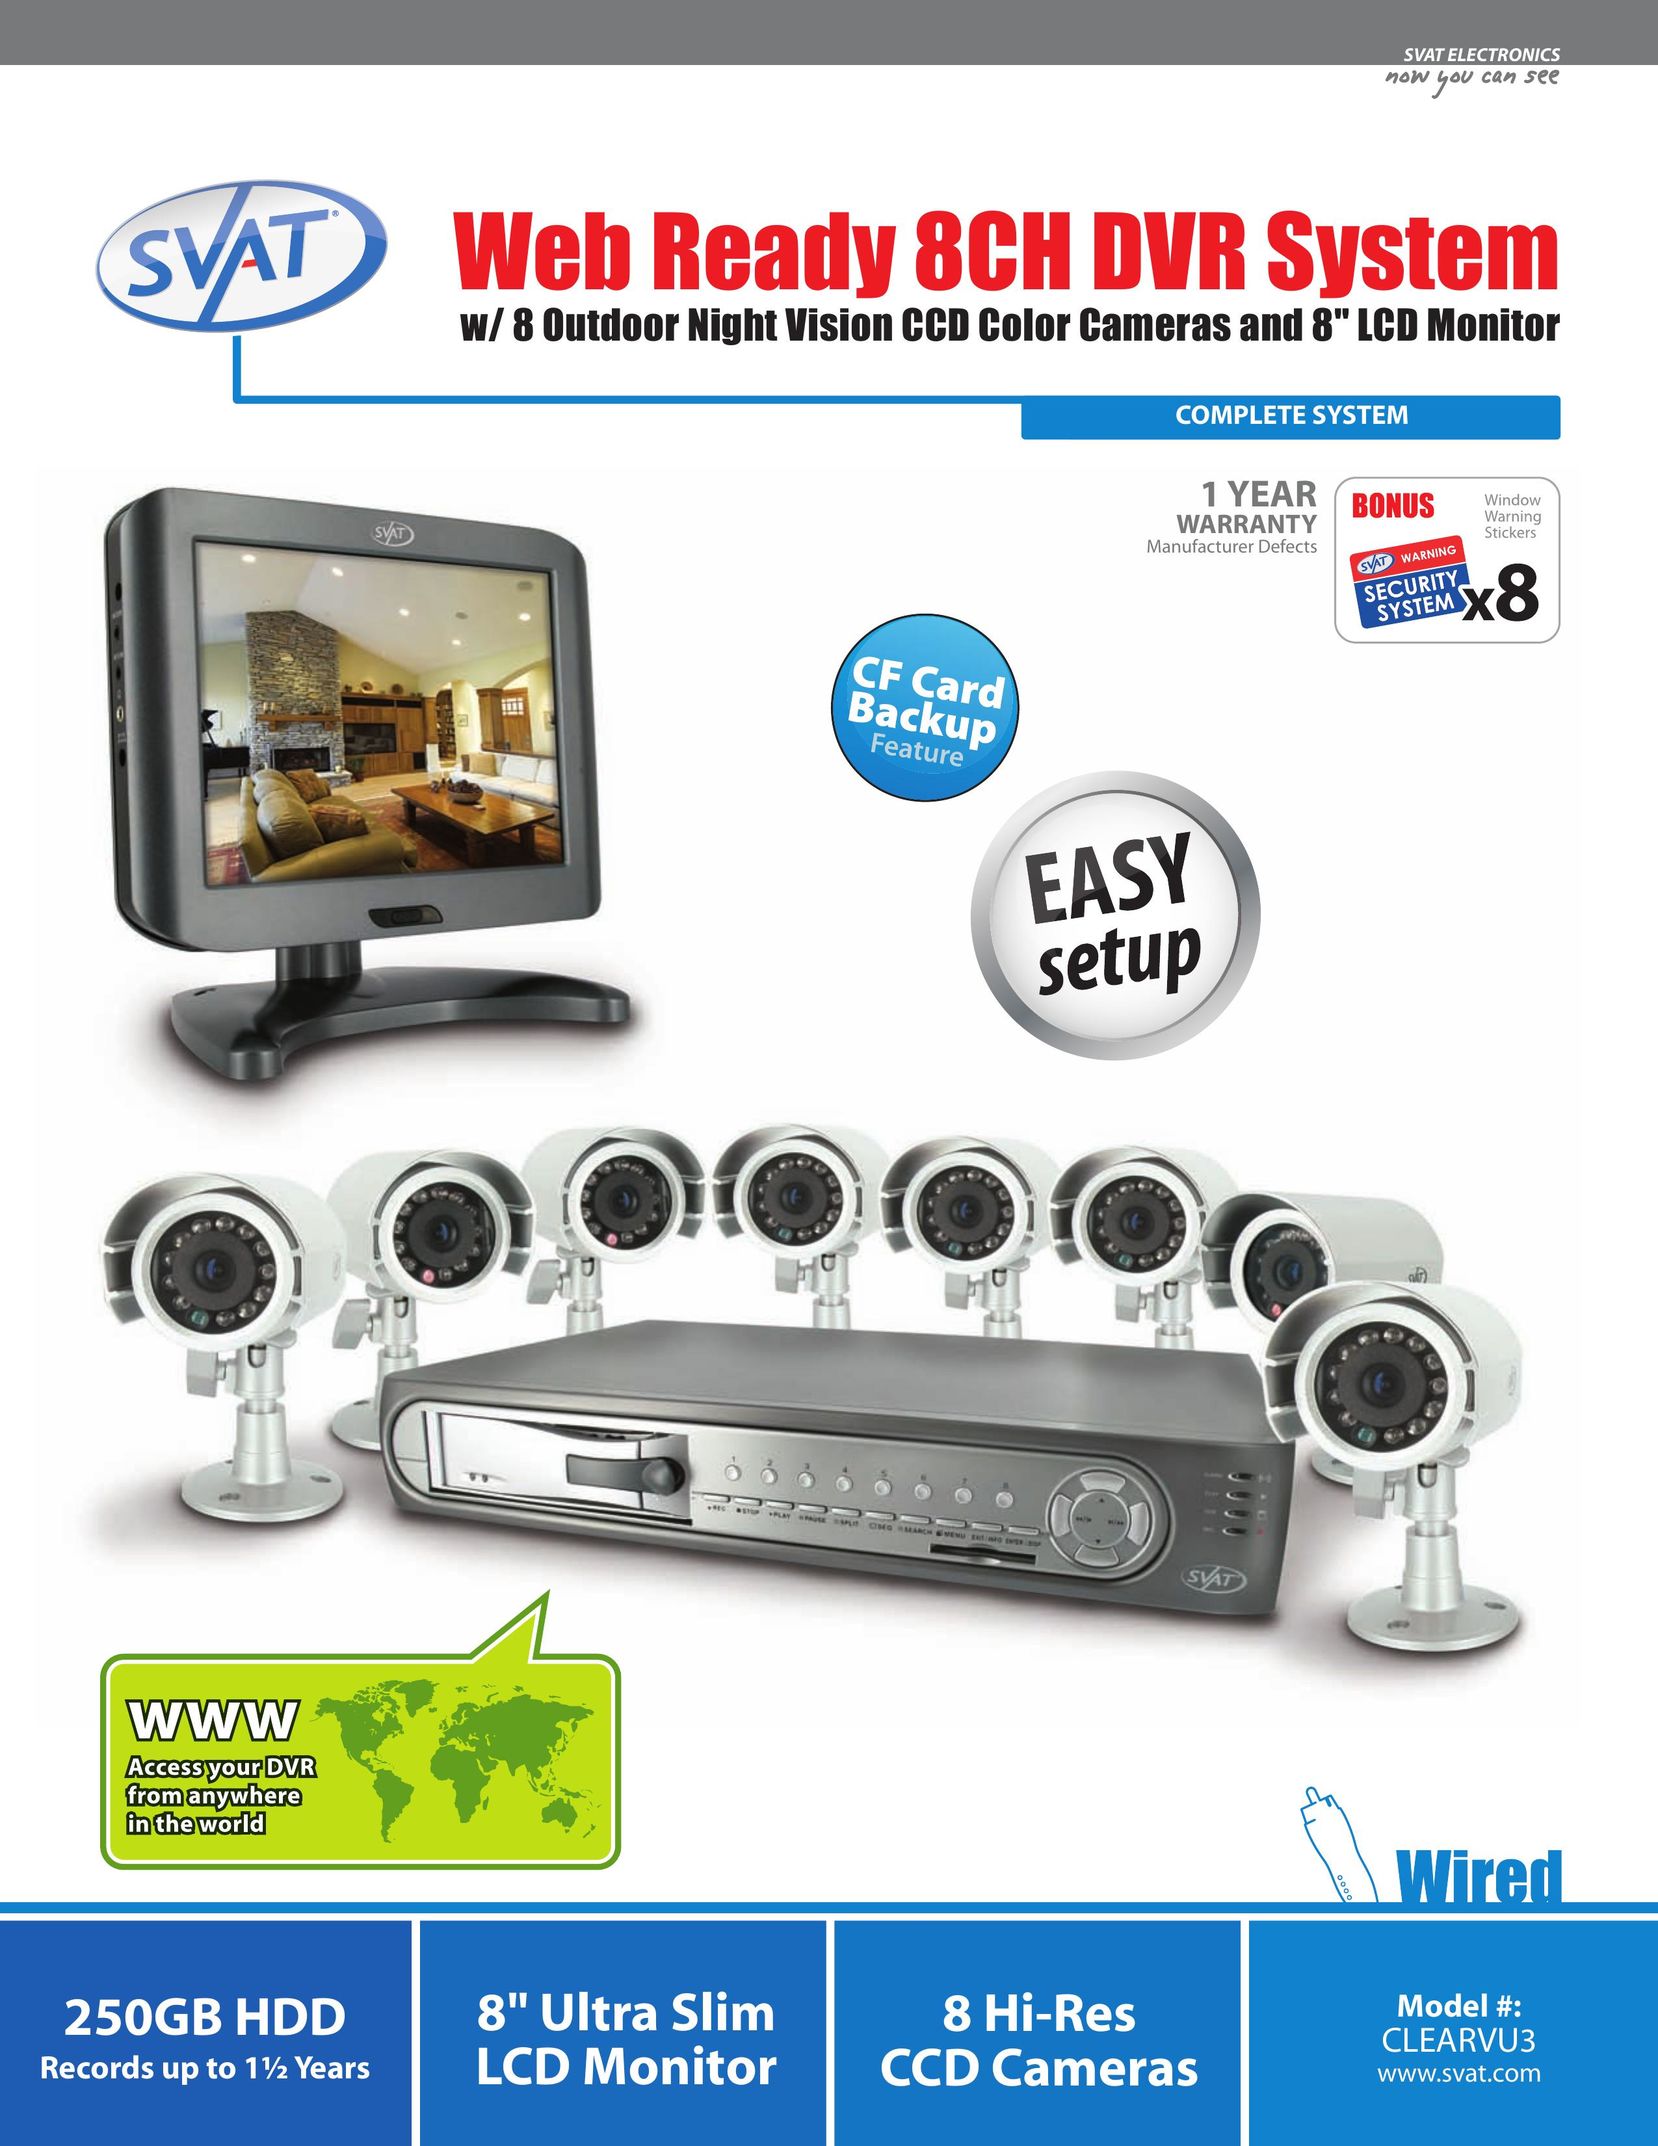 SVAT Electronics CLEARVU3 Home Security System User Manual